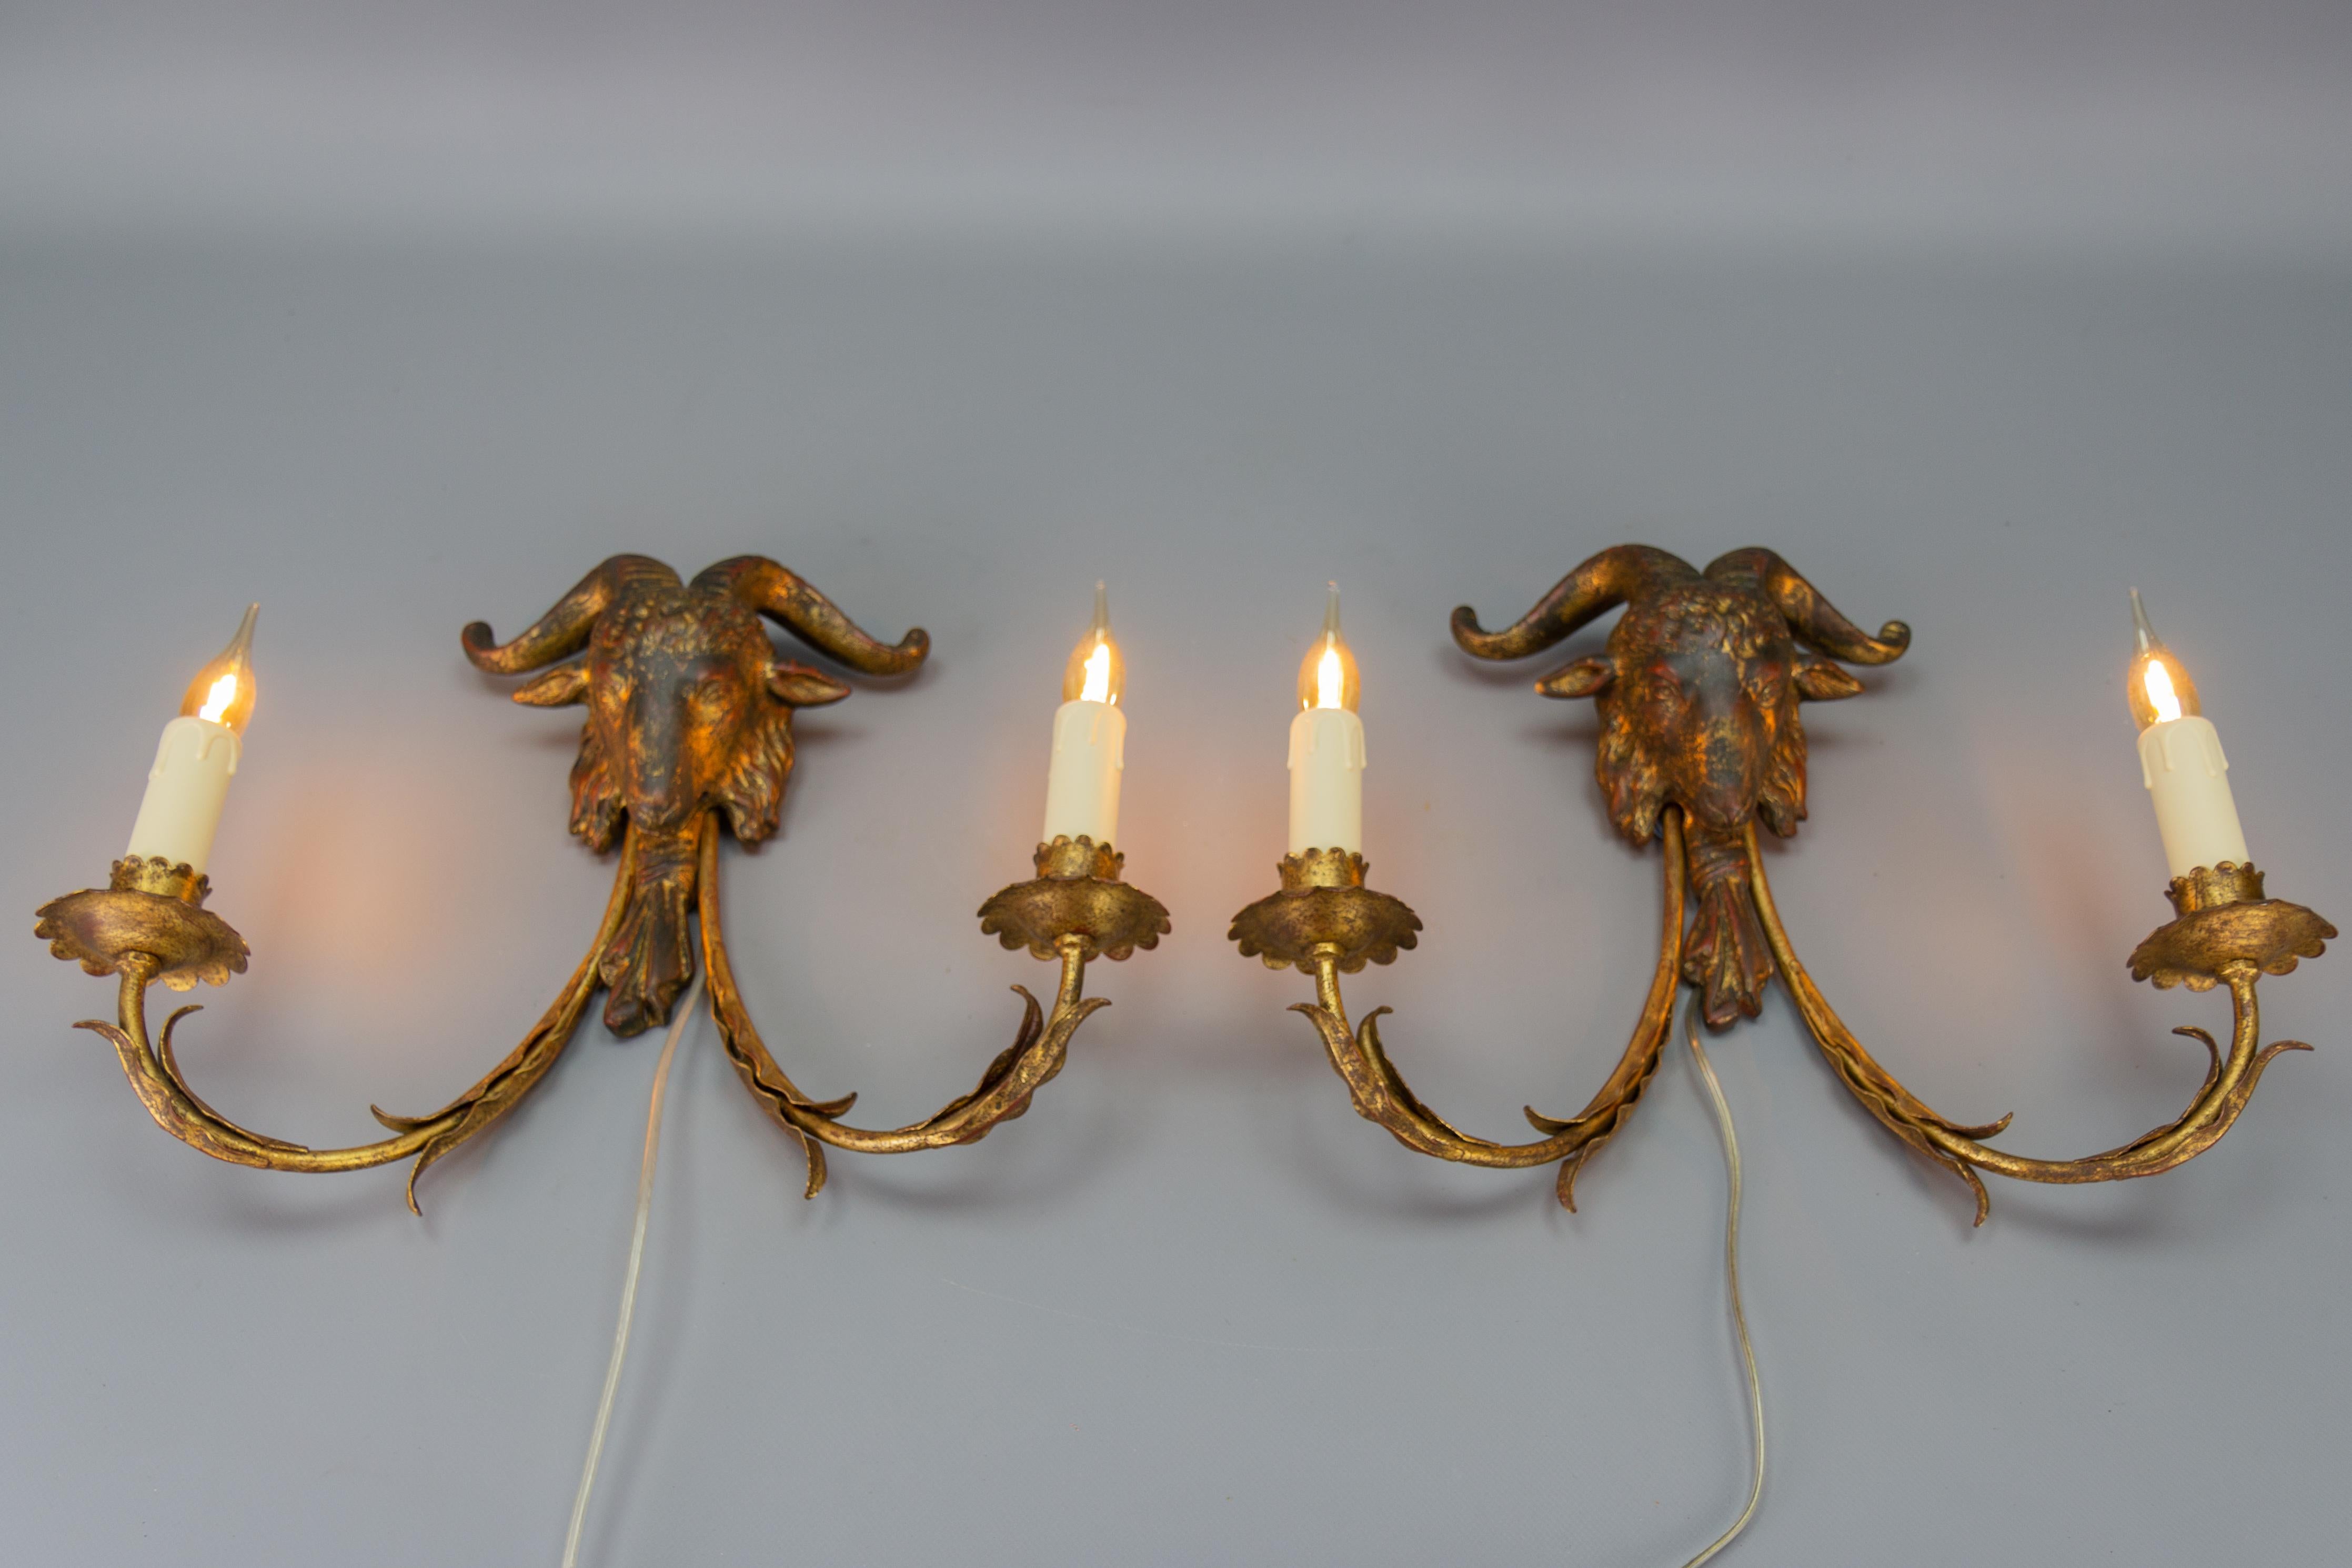 Pair of Palladio Gilt Metal and Giltwood Ram's Head Two-Light Sconces, ca. 1960s For Sale 5